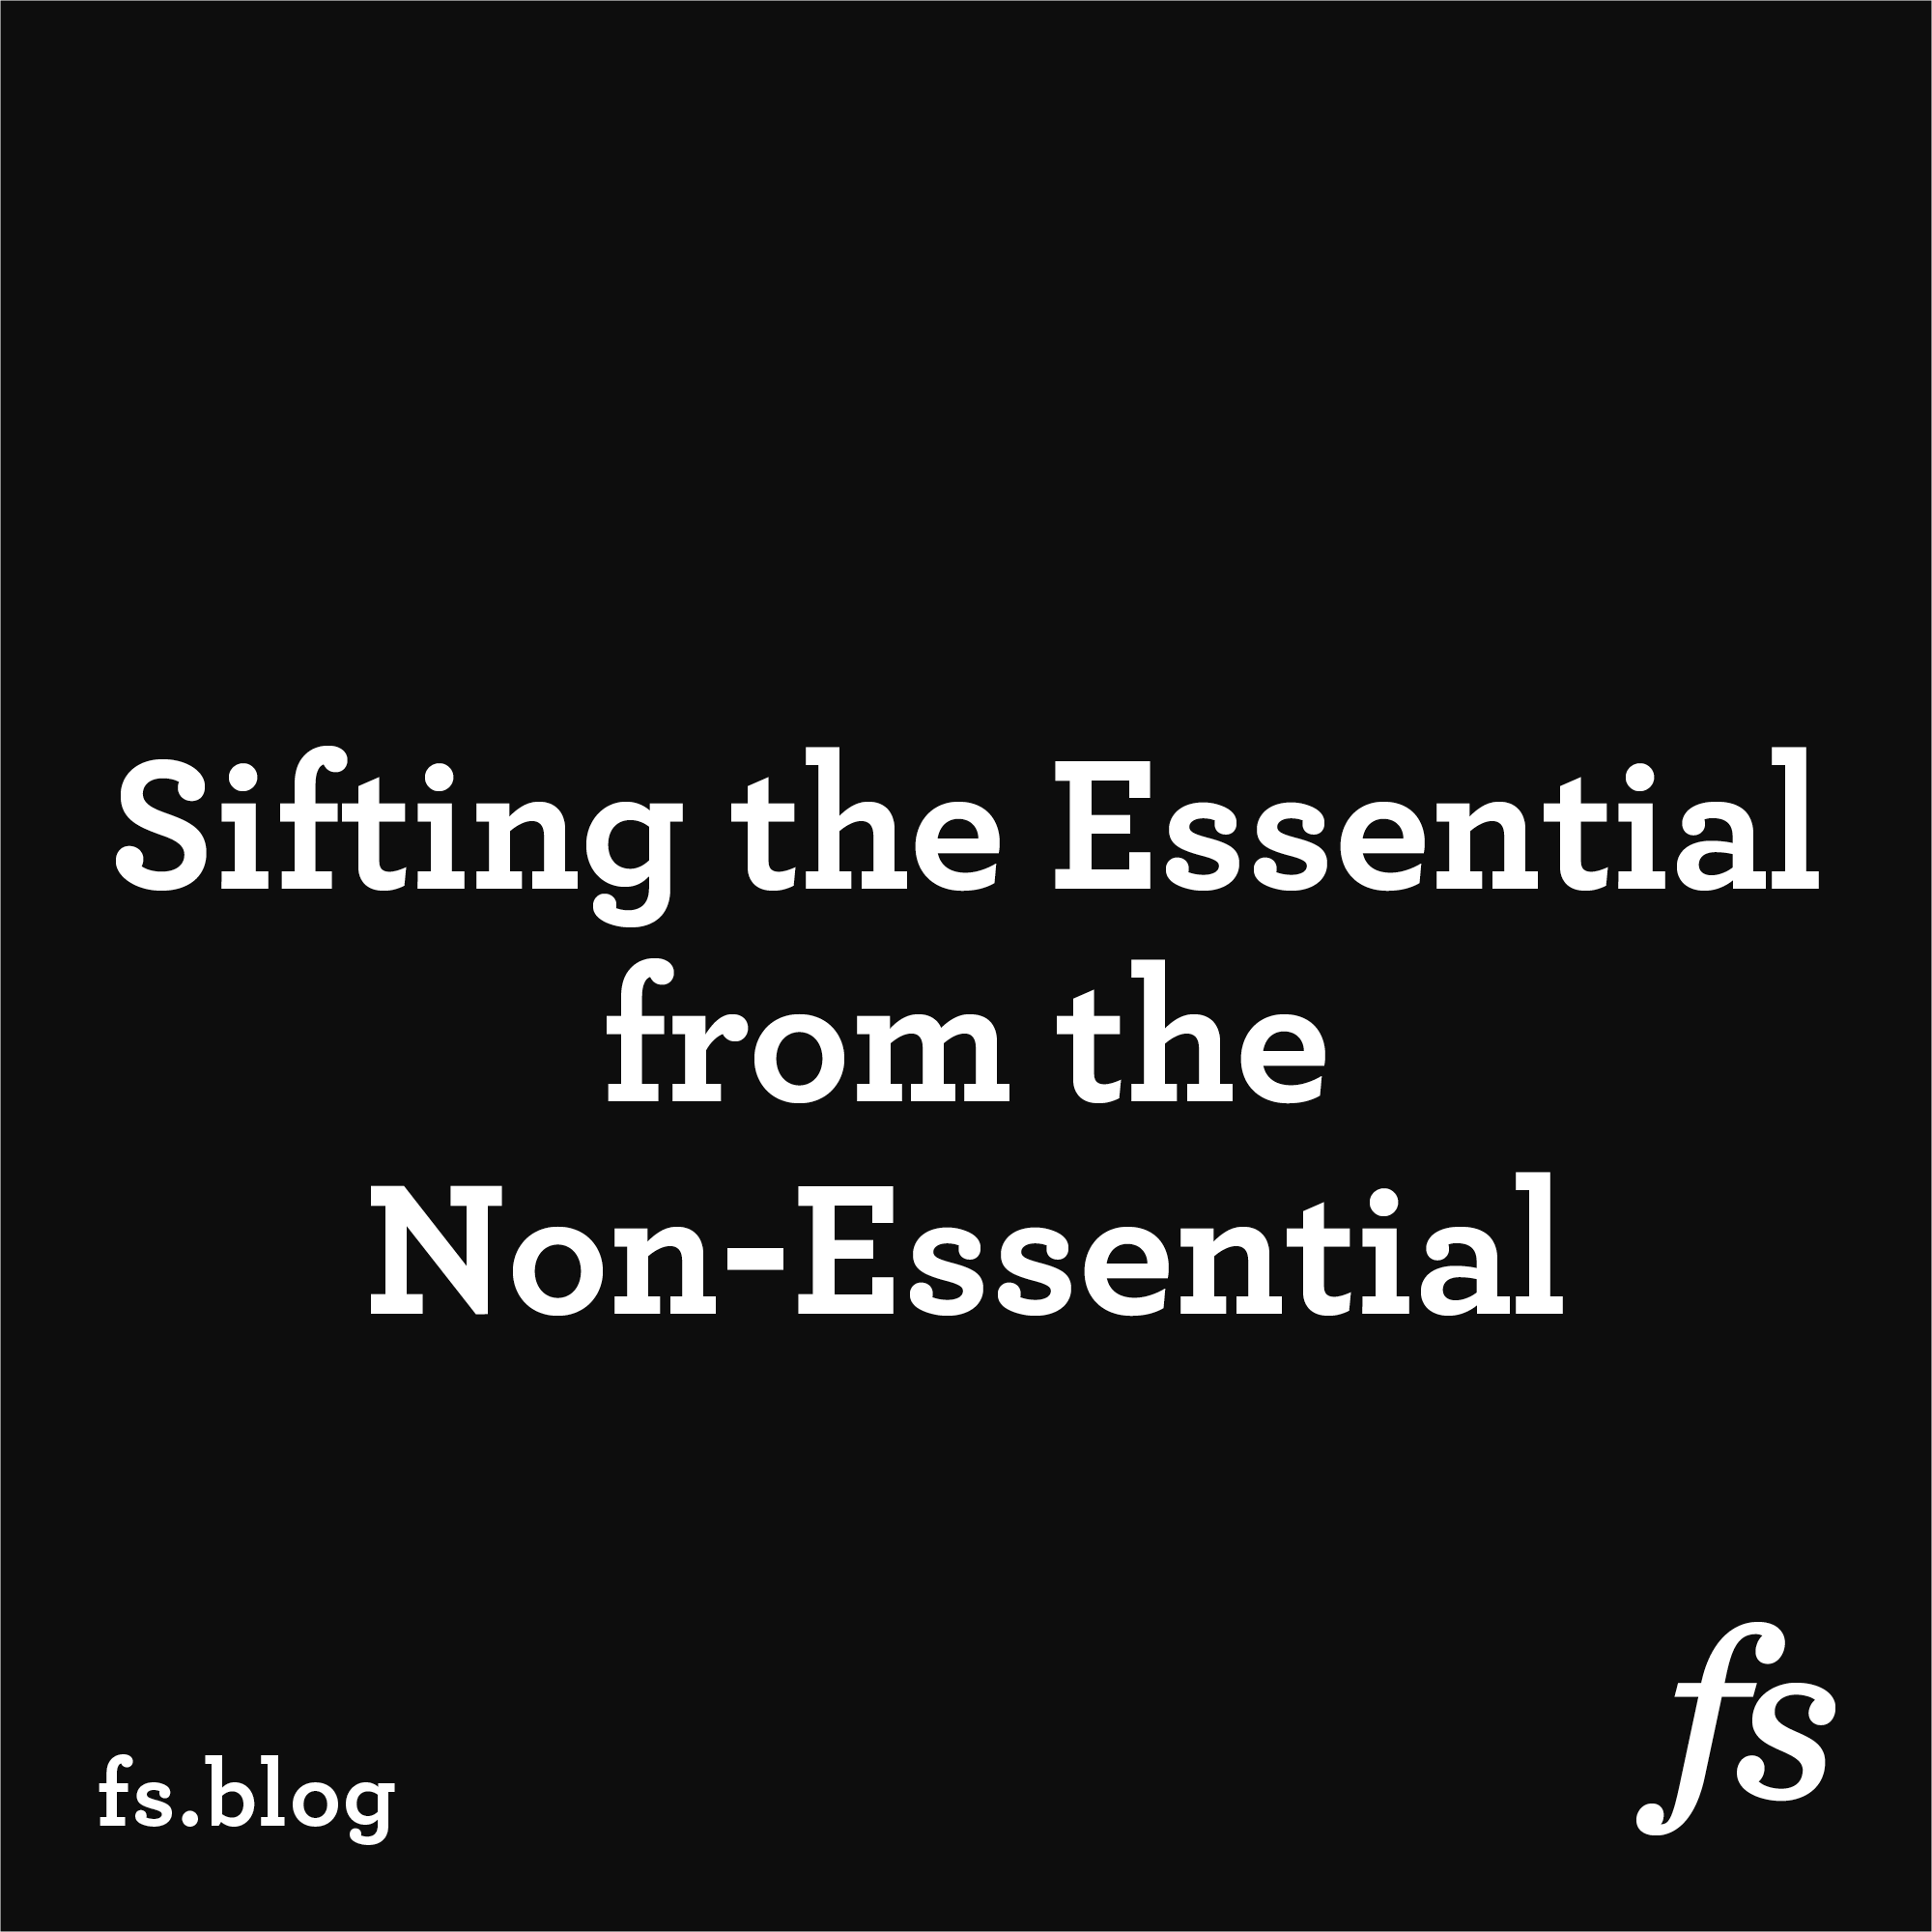 Albert Einstein on Sifting the Essential from the Non-Essential